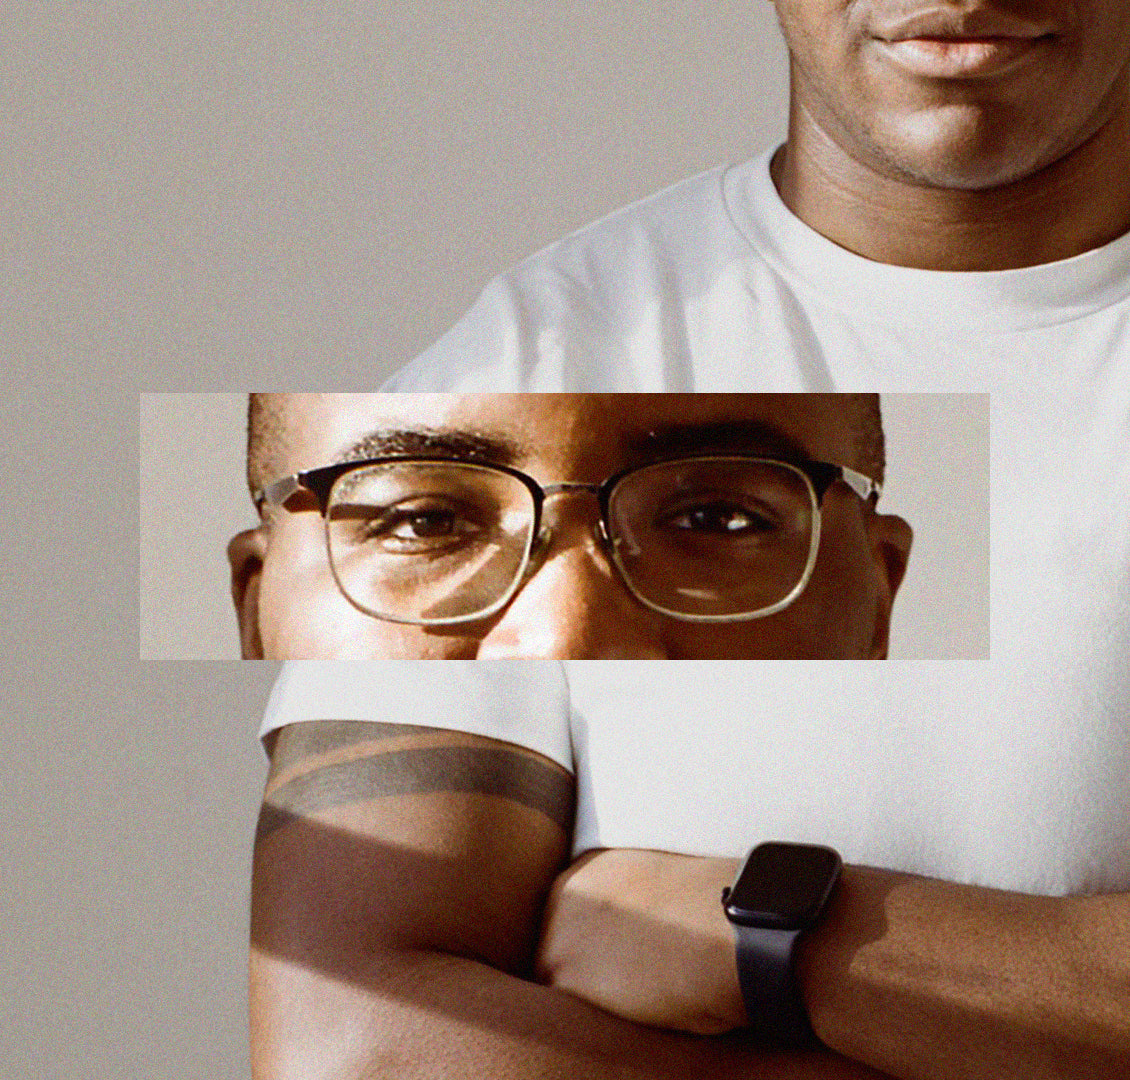 Collage of black transmasc person with glasses